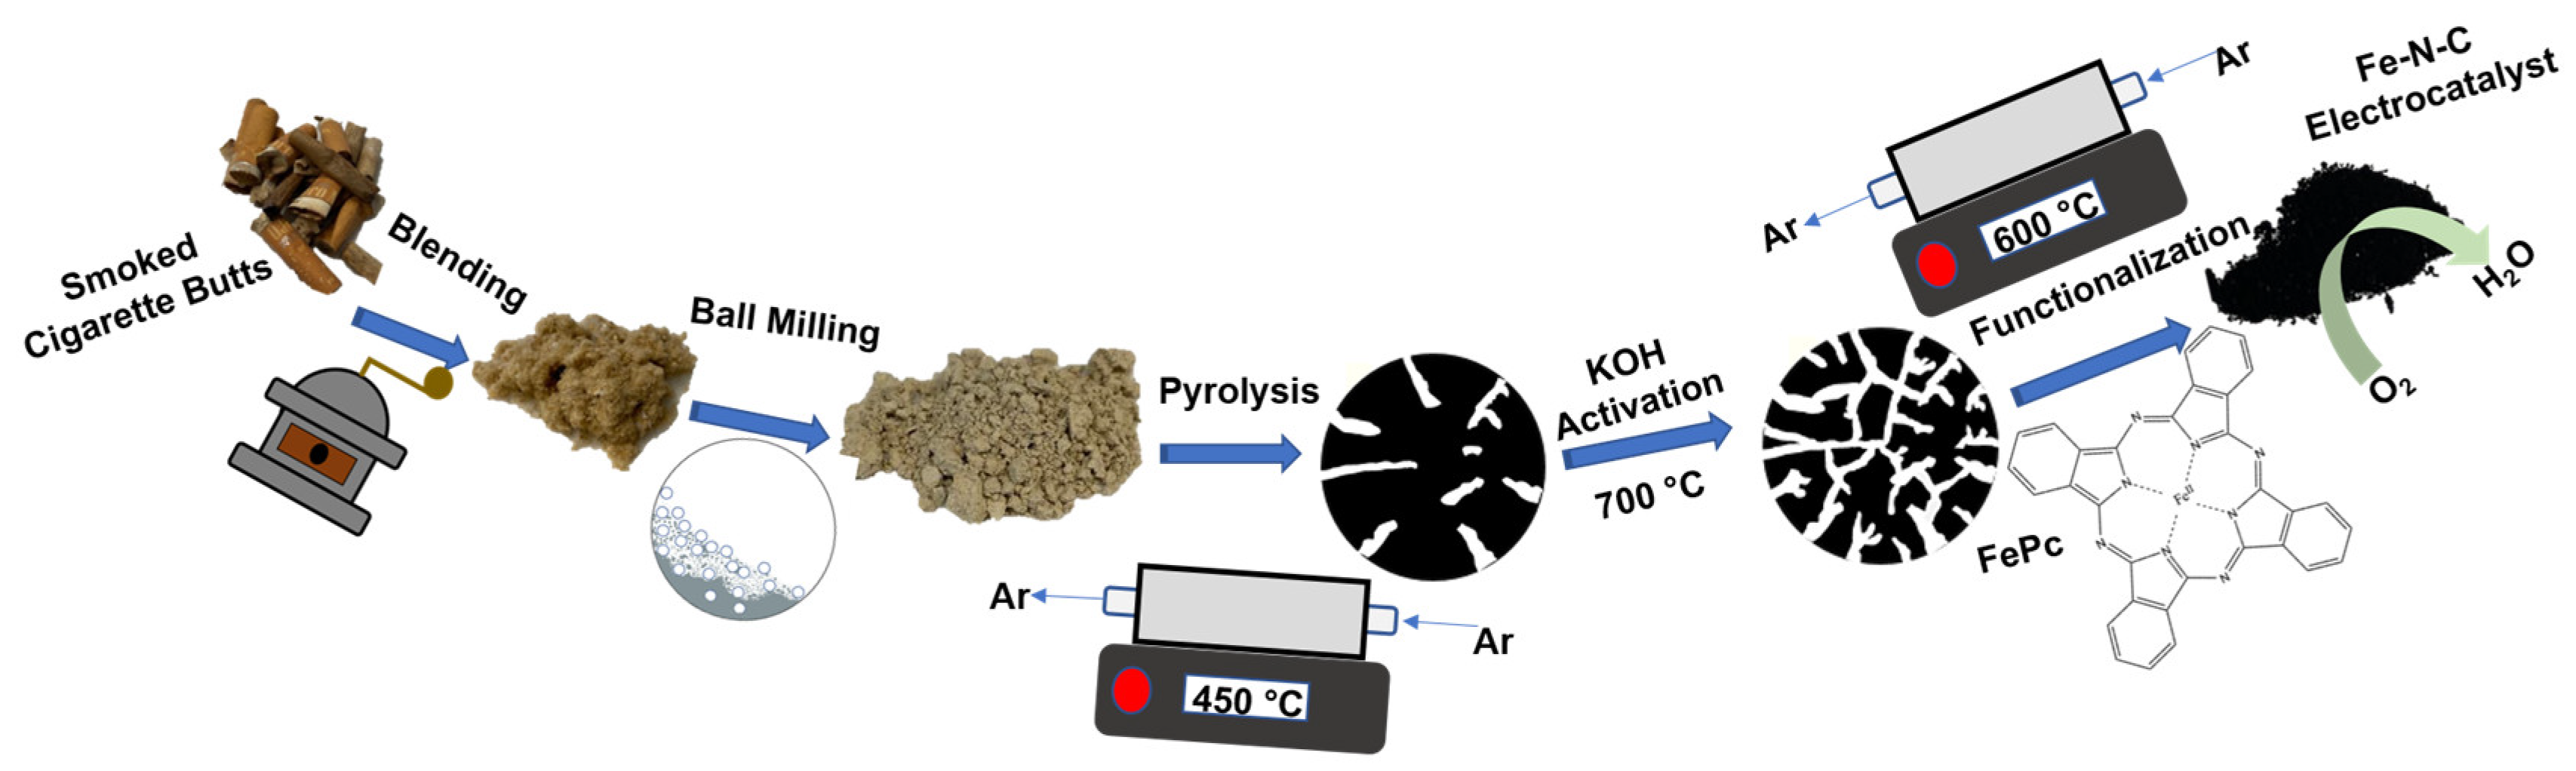 Giving Metal-Free Free Reduction | Alkaline Butts: Oxygen New Group Acid, Full-Text to into Life Waste in Environment Transformation Catalysts Cigarette Neutral Electrocatalysts Reaction Platinum and | for